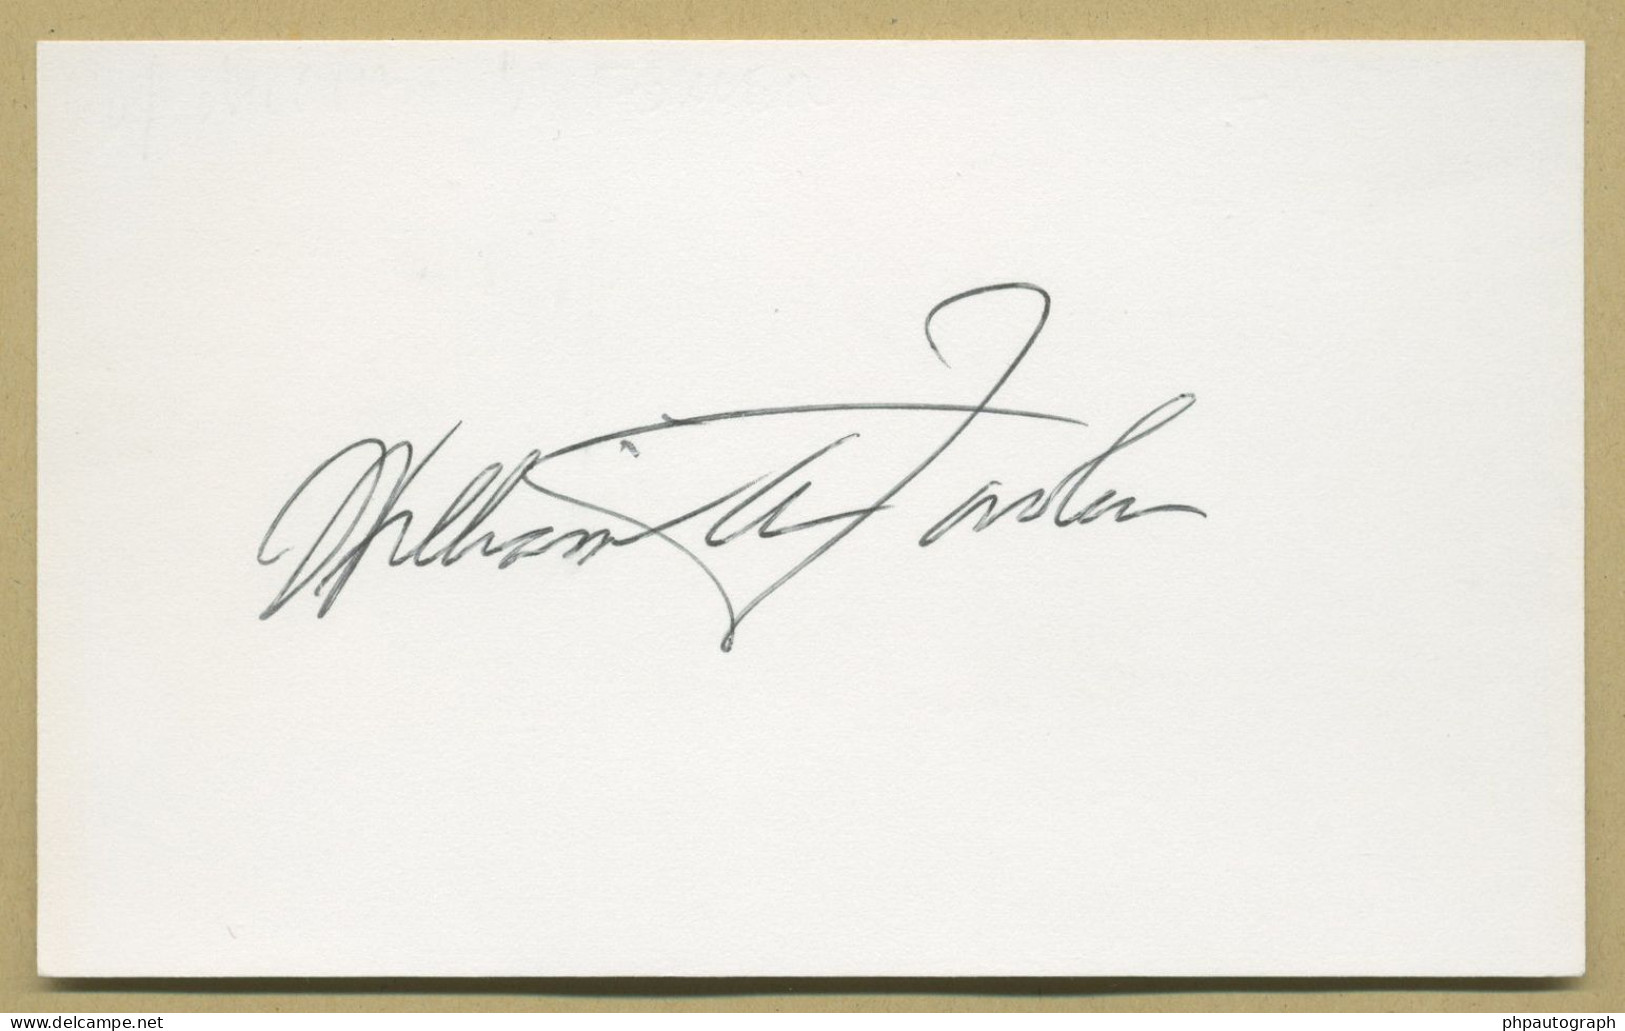 William Alfred Fowler (1911-1995) - Astrophysicist - Signed Card + Photo - 80s - Nobel Prize - Inventores Y Científicos